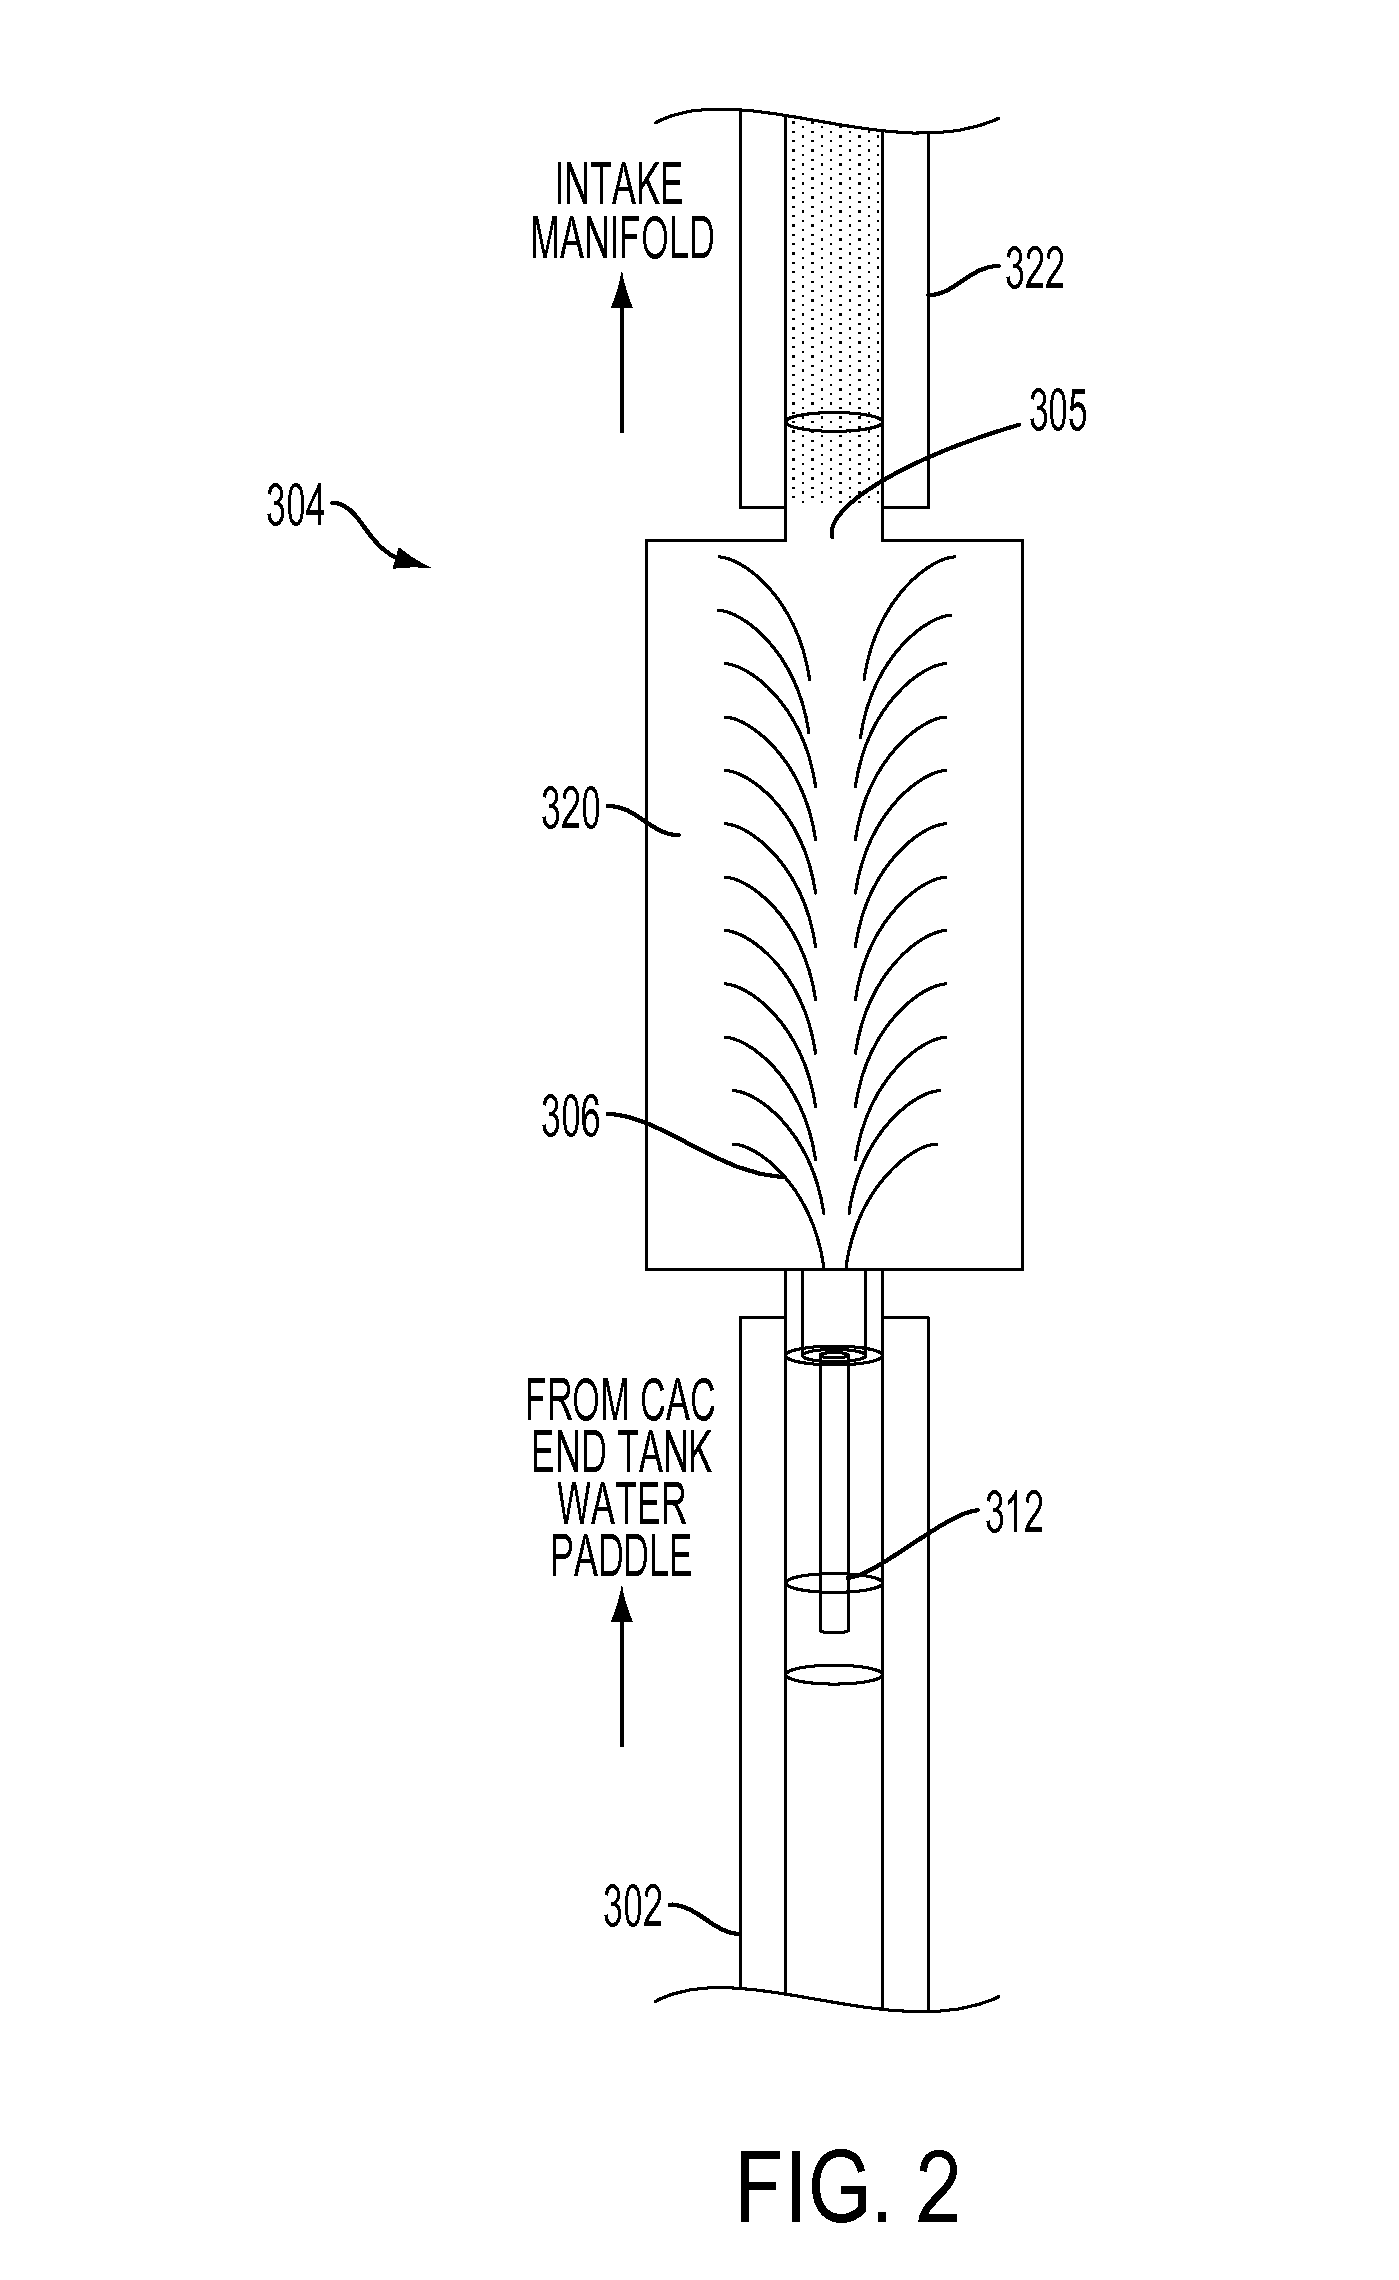 Misfire prevention water agitator system and method